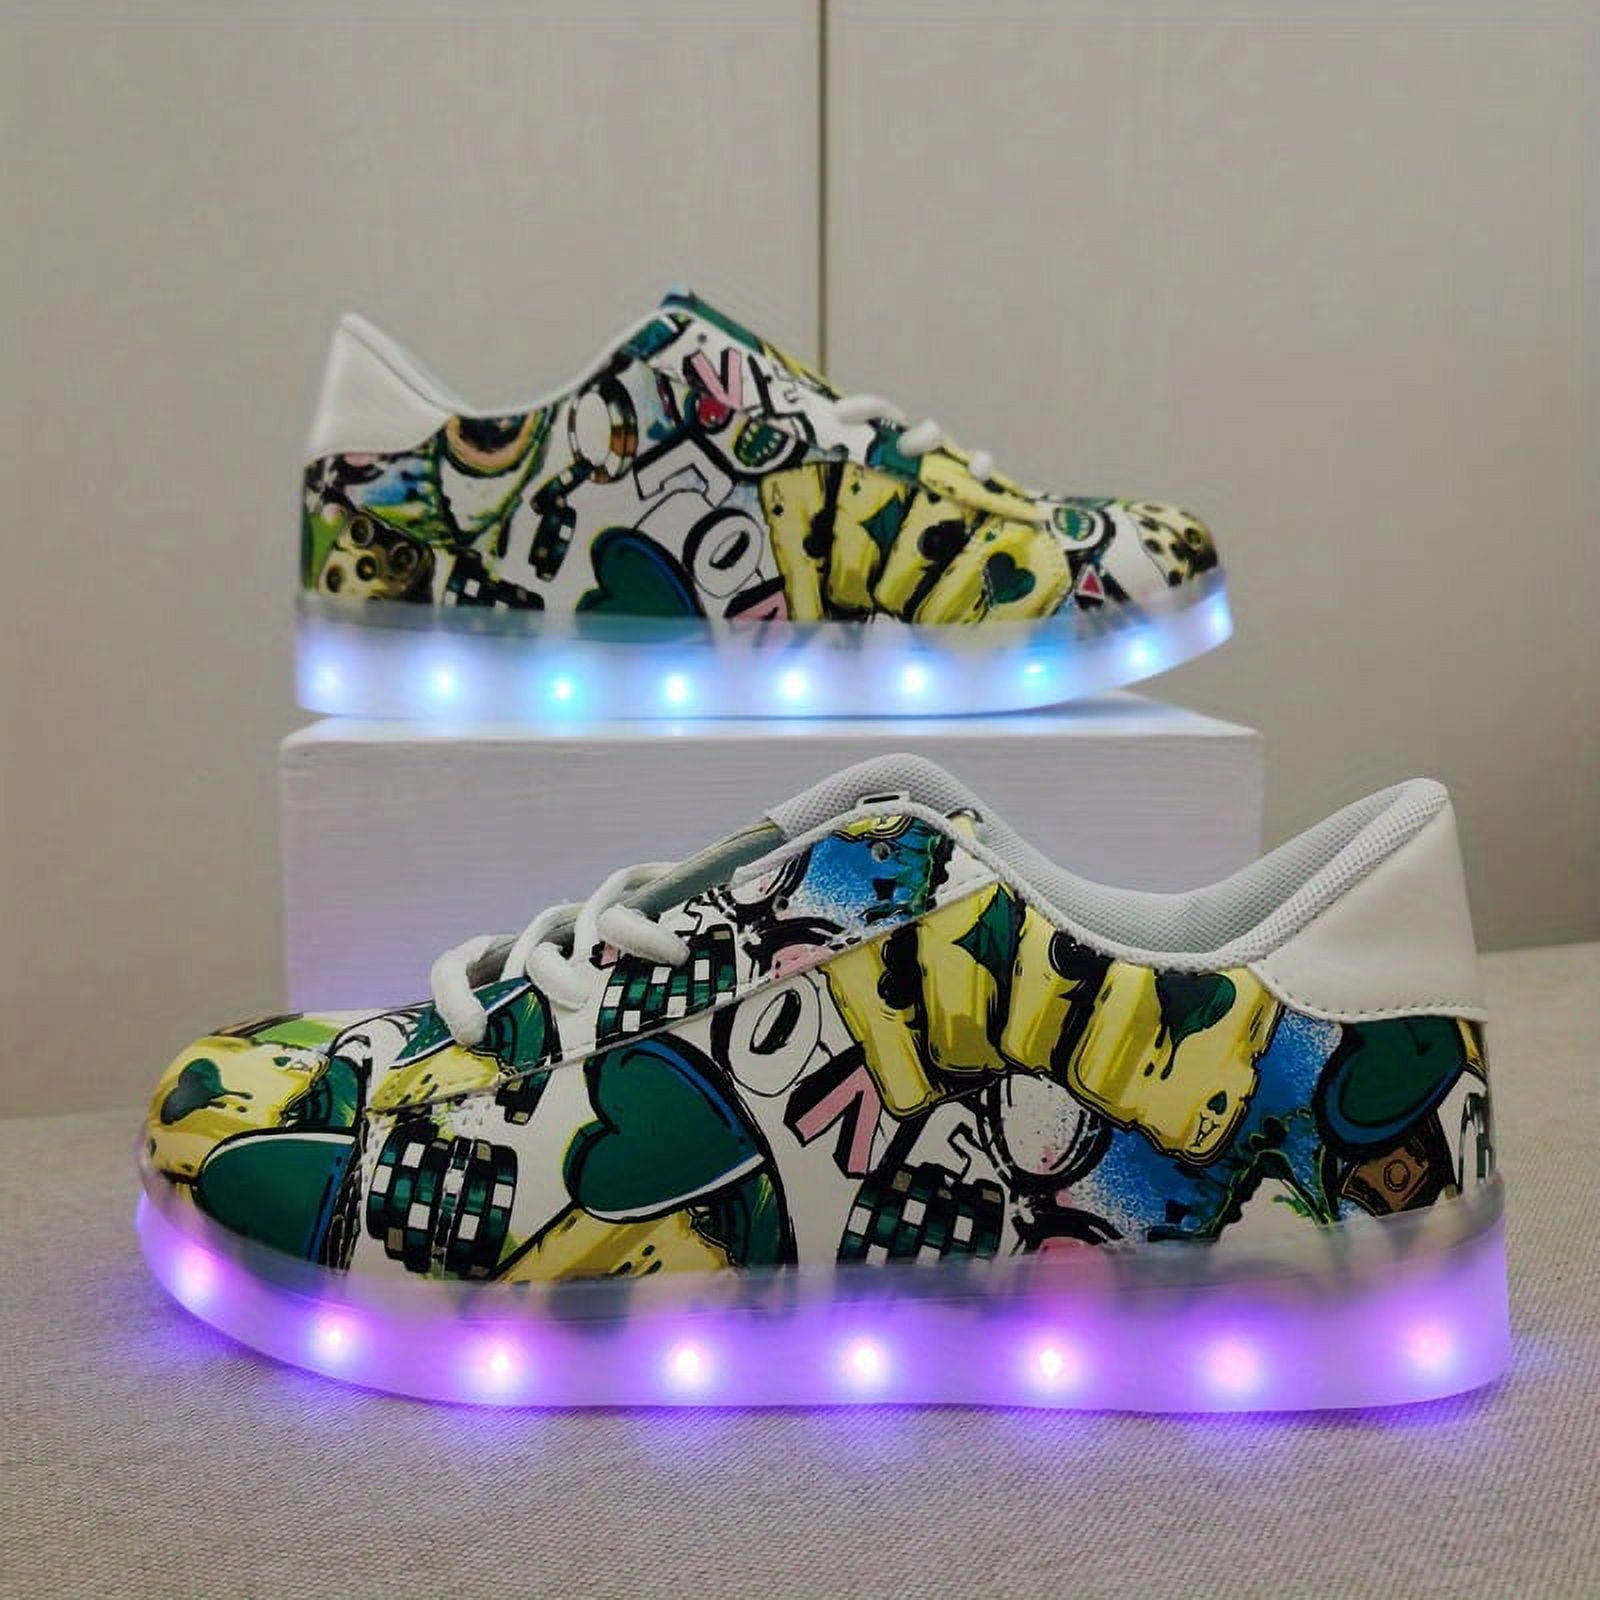 ‘s Colorful Luminous Sneakers Multicolor Pattern Lace Up Low Top Comfy ...